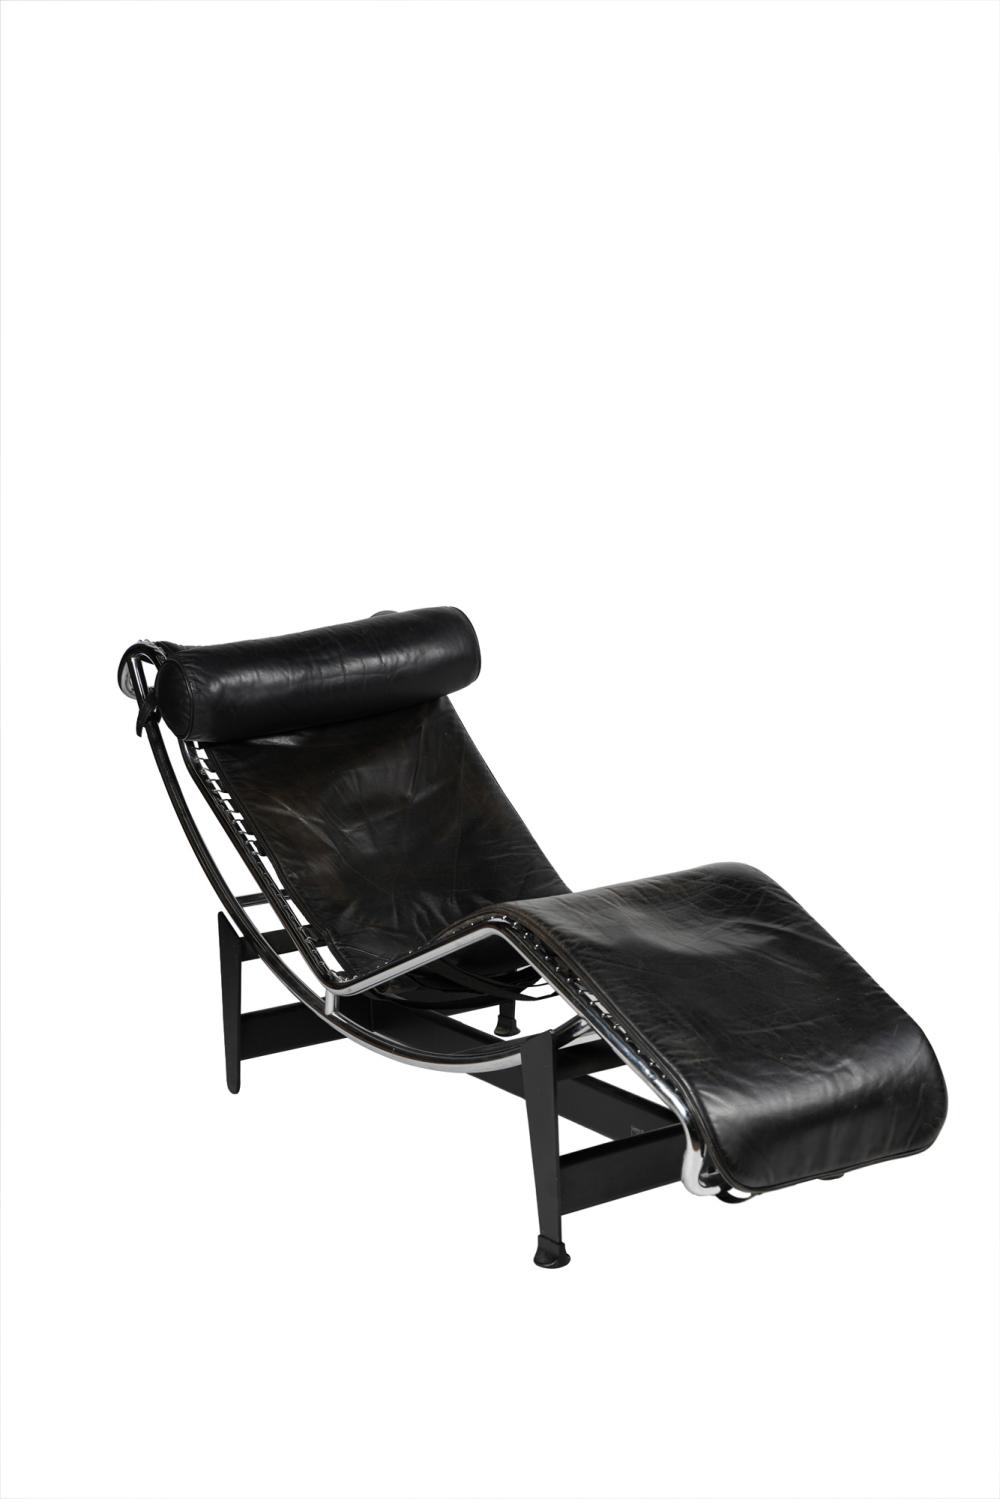 LE CORBUSIER LC4 LOUNGE CHAIRmanufactured